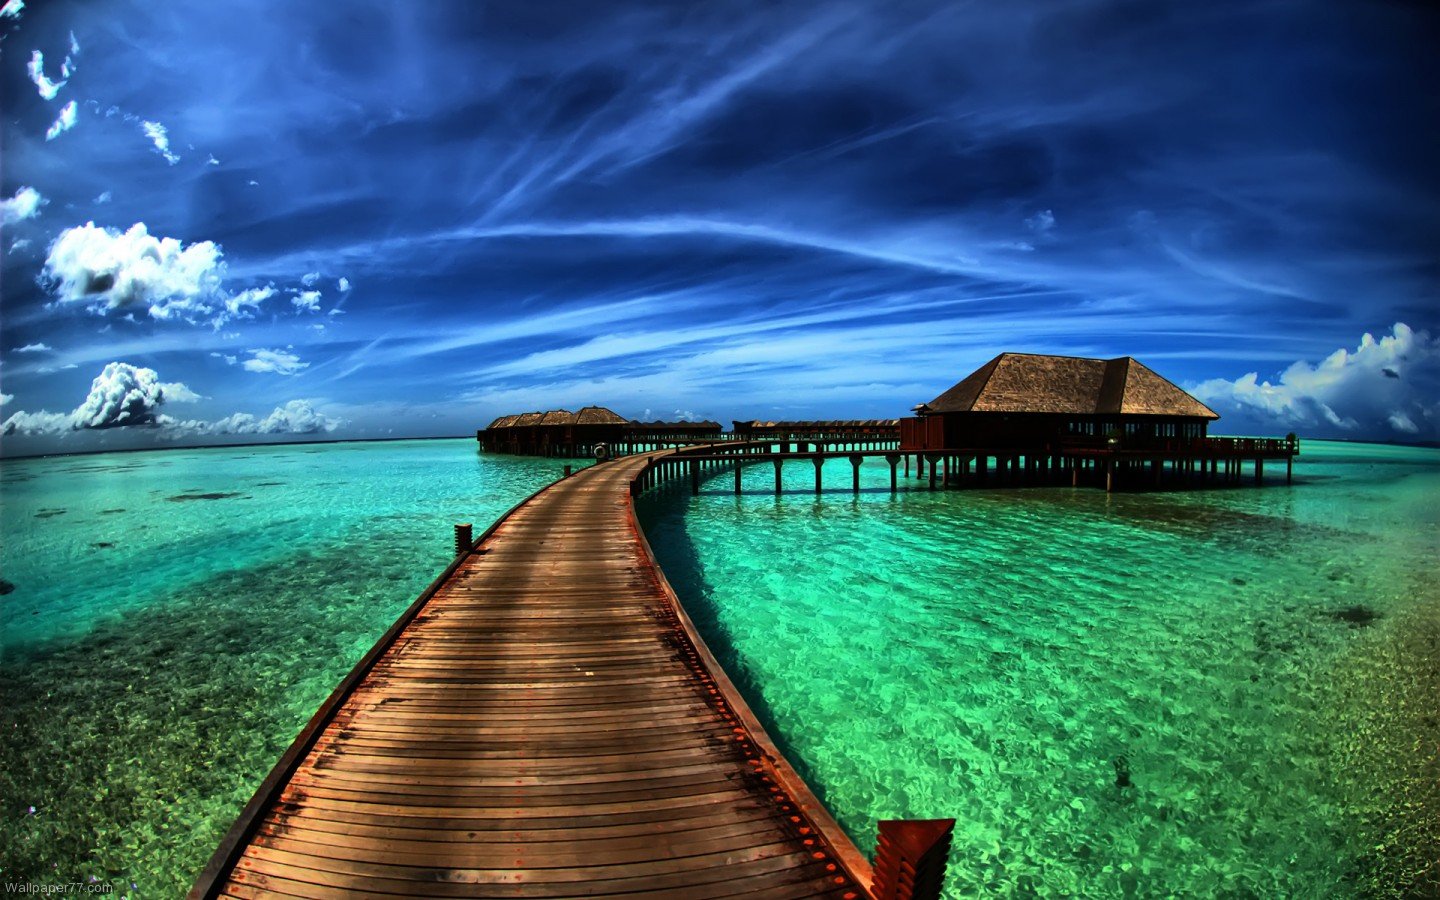 The Dock 1440x900 pixels Wallpapers tagged Beach